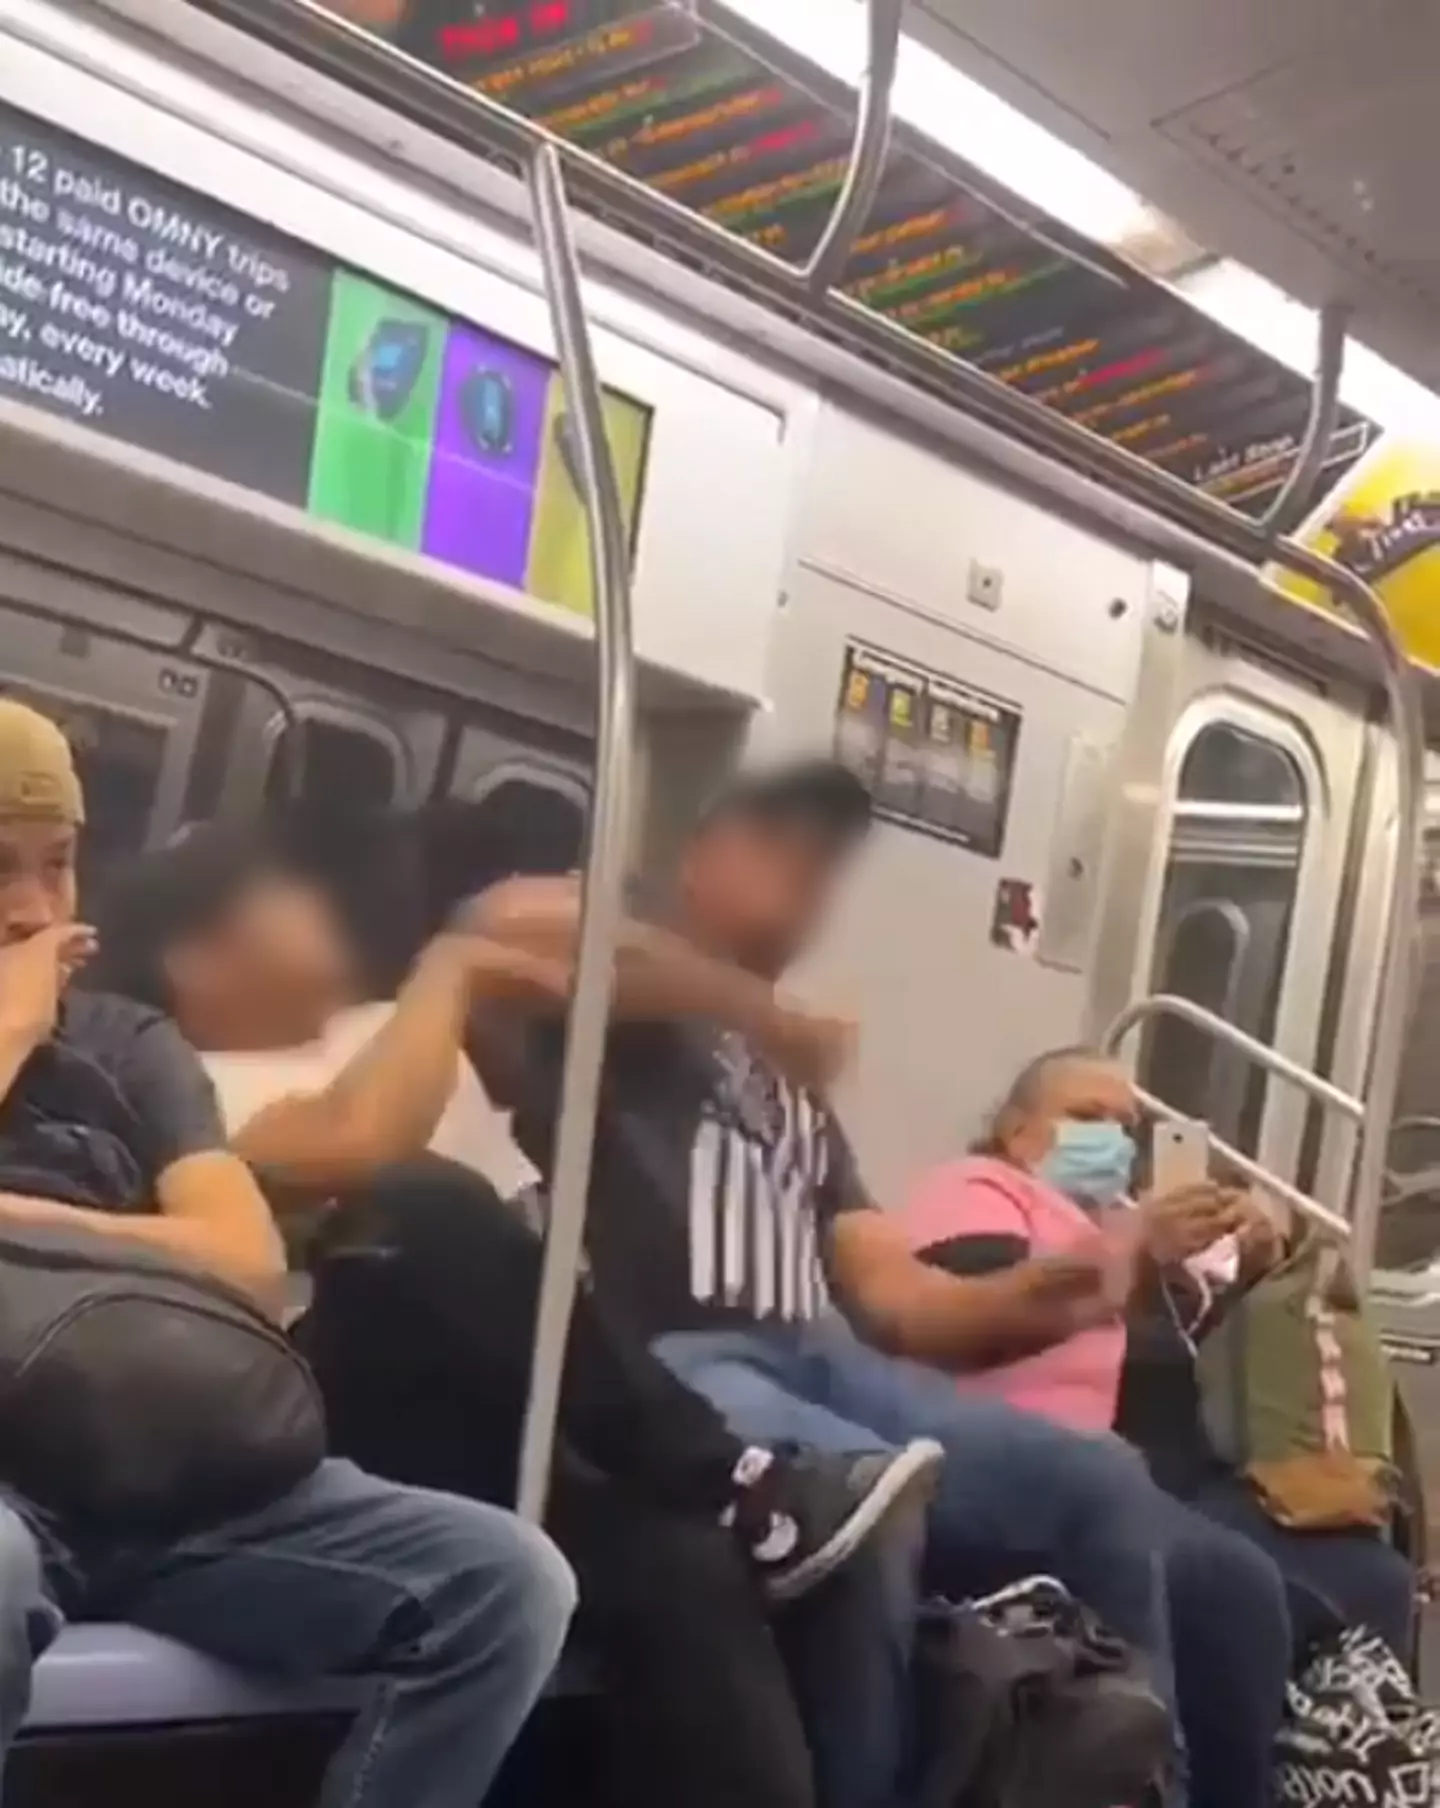 The fight broke out at 5:30am on a New York subway.